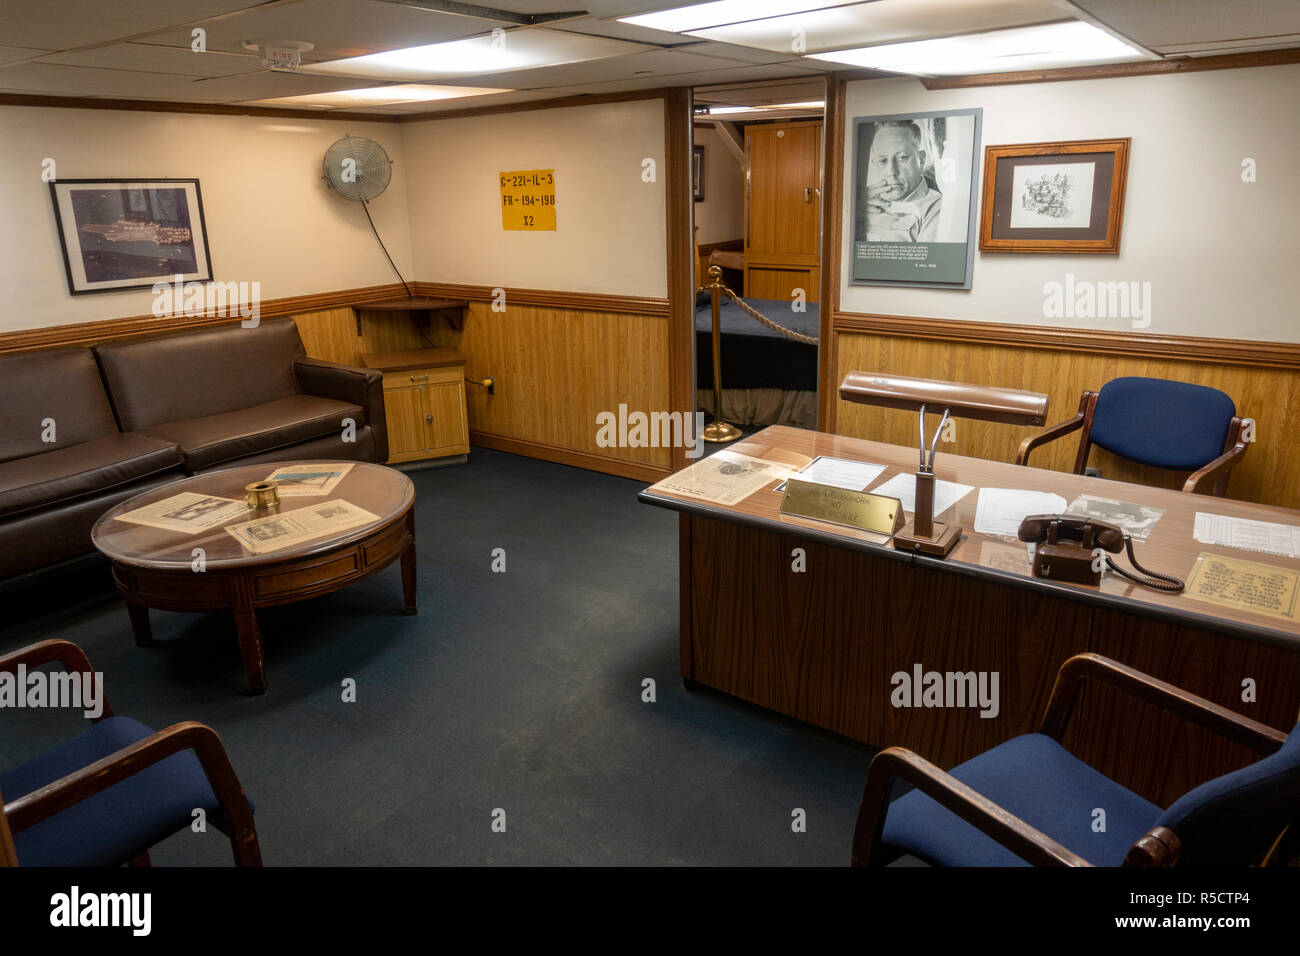 Offiziere stateroom, USS Midway Museum, San Diego, California, United States. Stockfoto